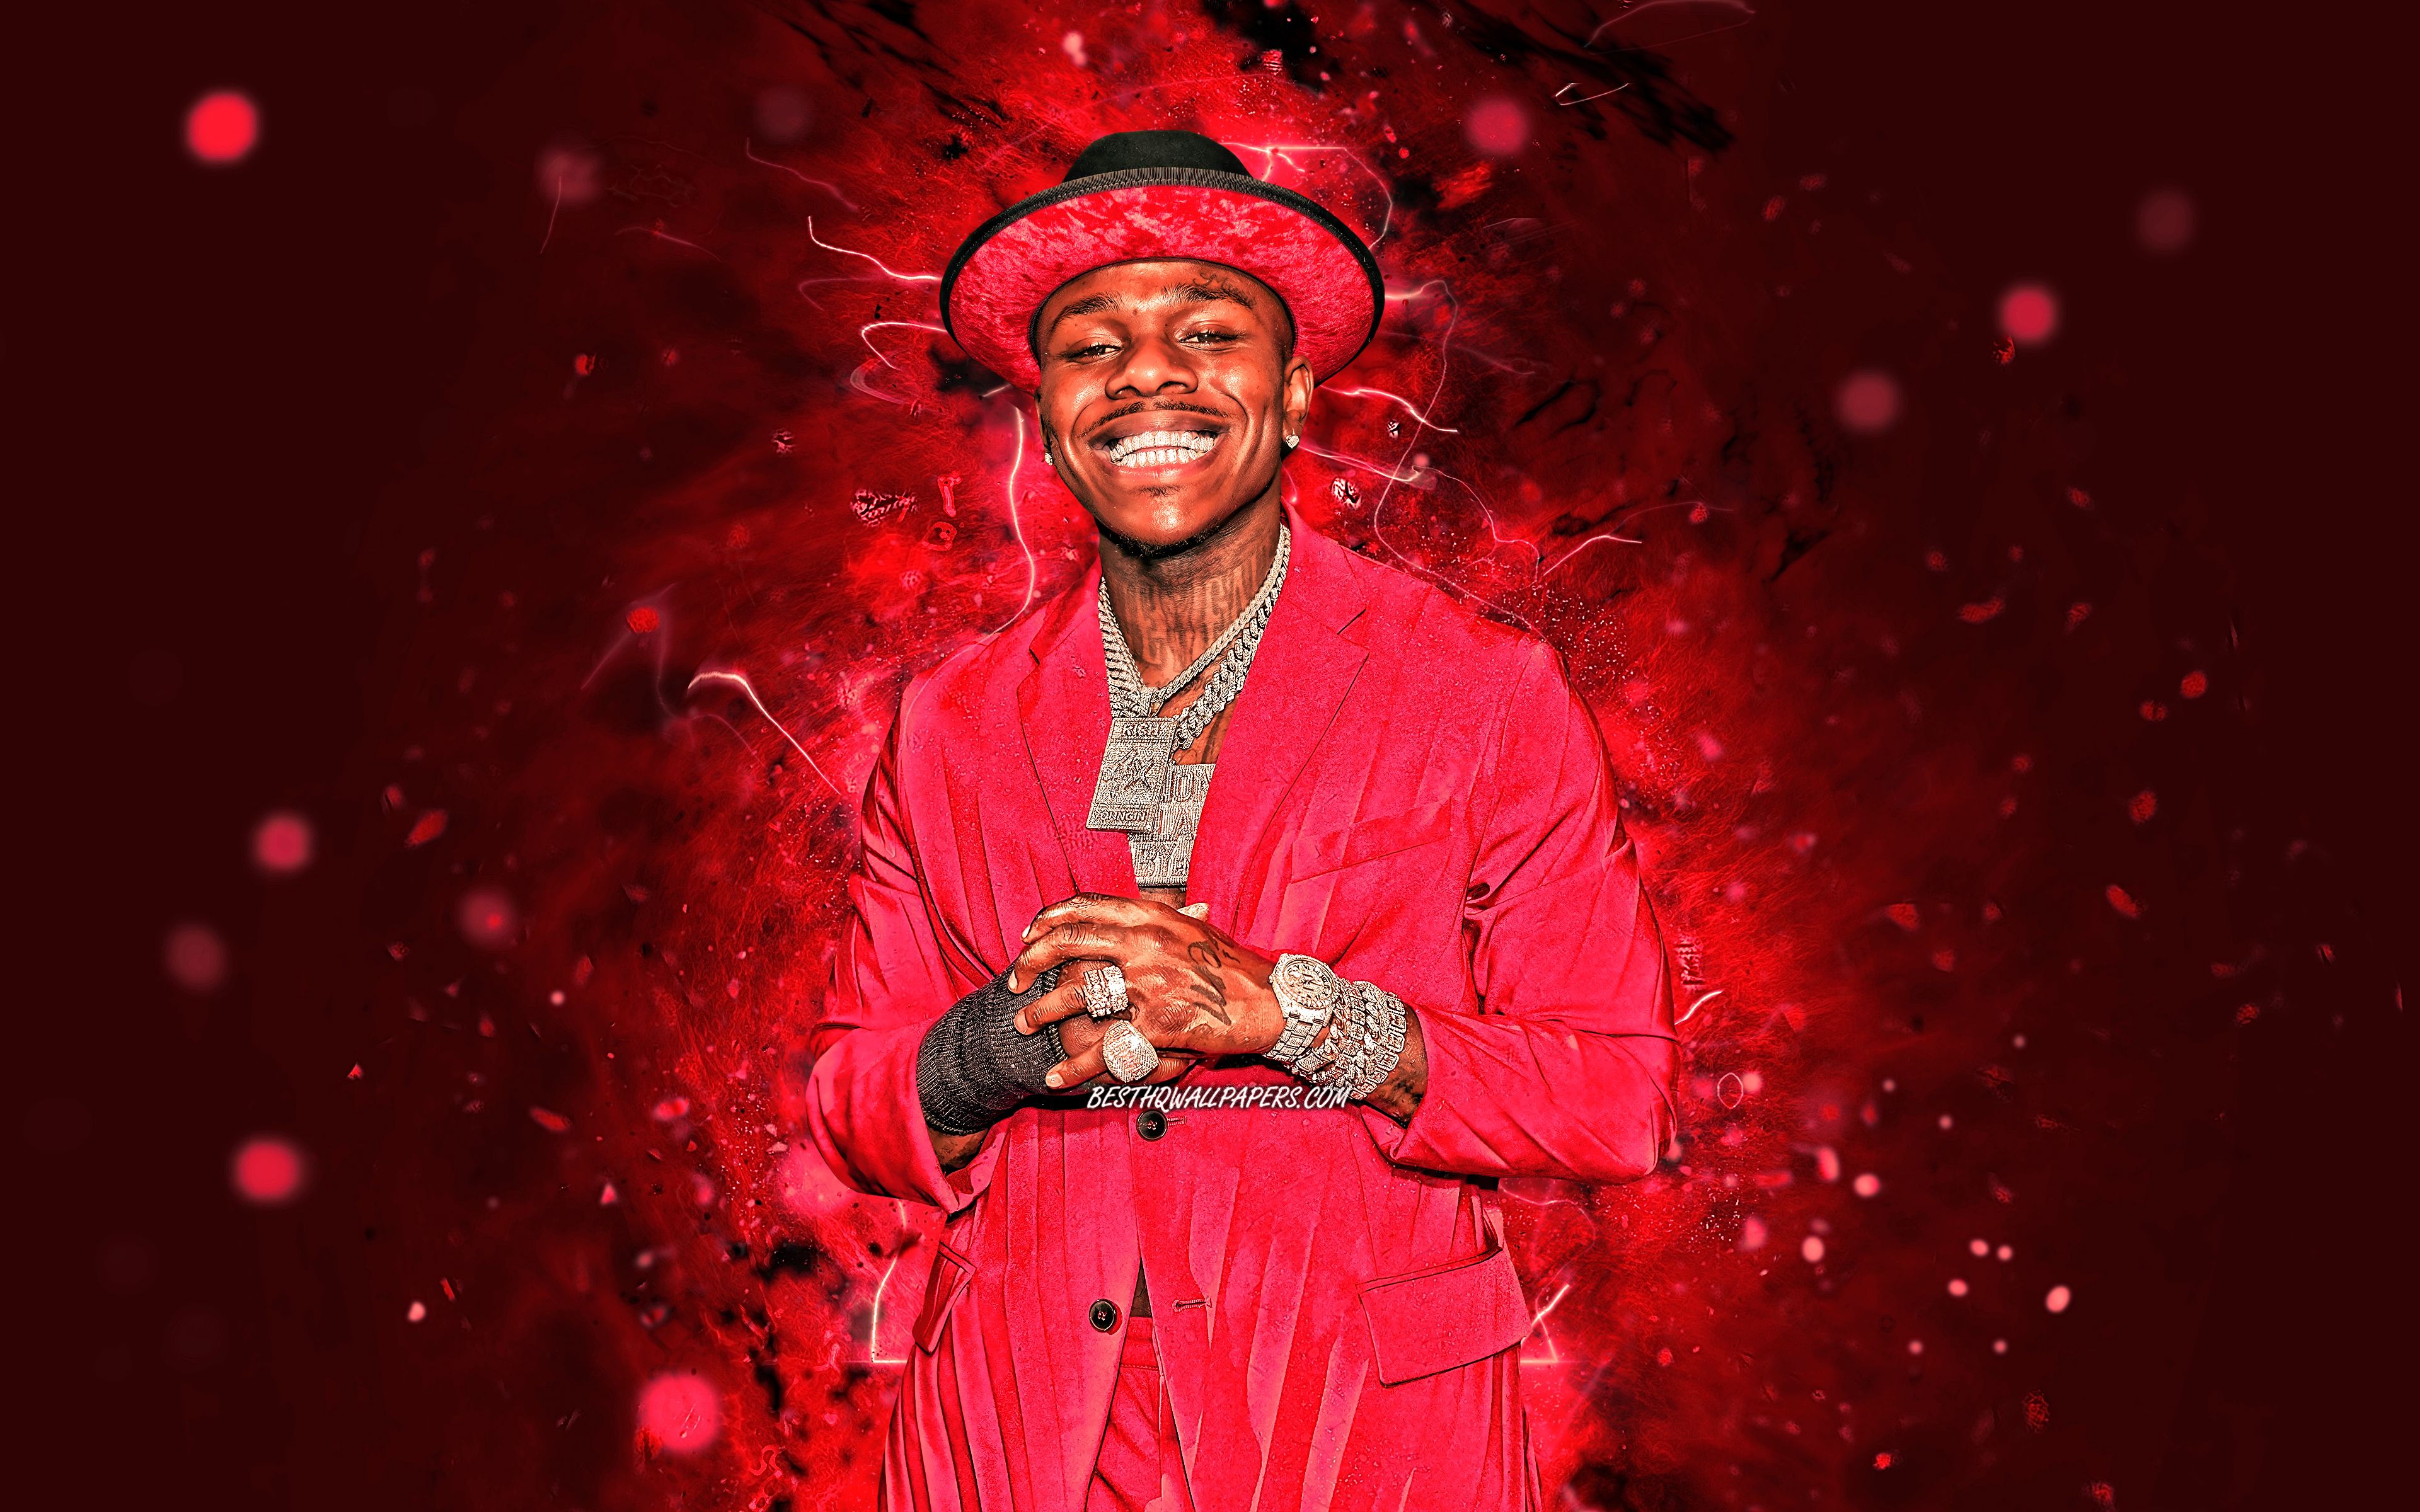 Download wallpaper 4k, DaBaby, american rapper, red costume, music stars, creative, Jonathan Lyndale Kirk, red neon lights, american celebrity, DaBaby 4K for desktop with resolution 3840x2400. High Quality HD picture wallpaper